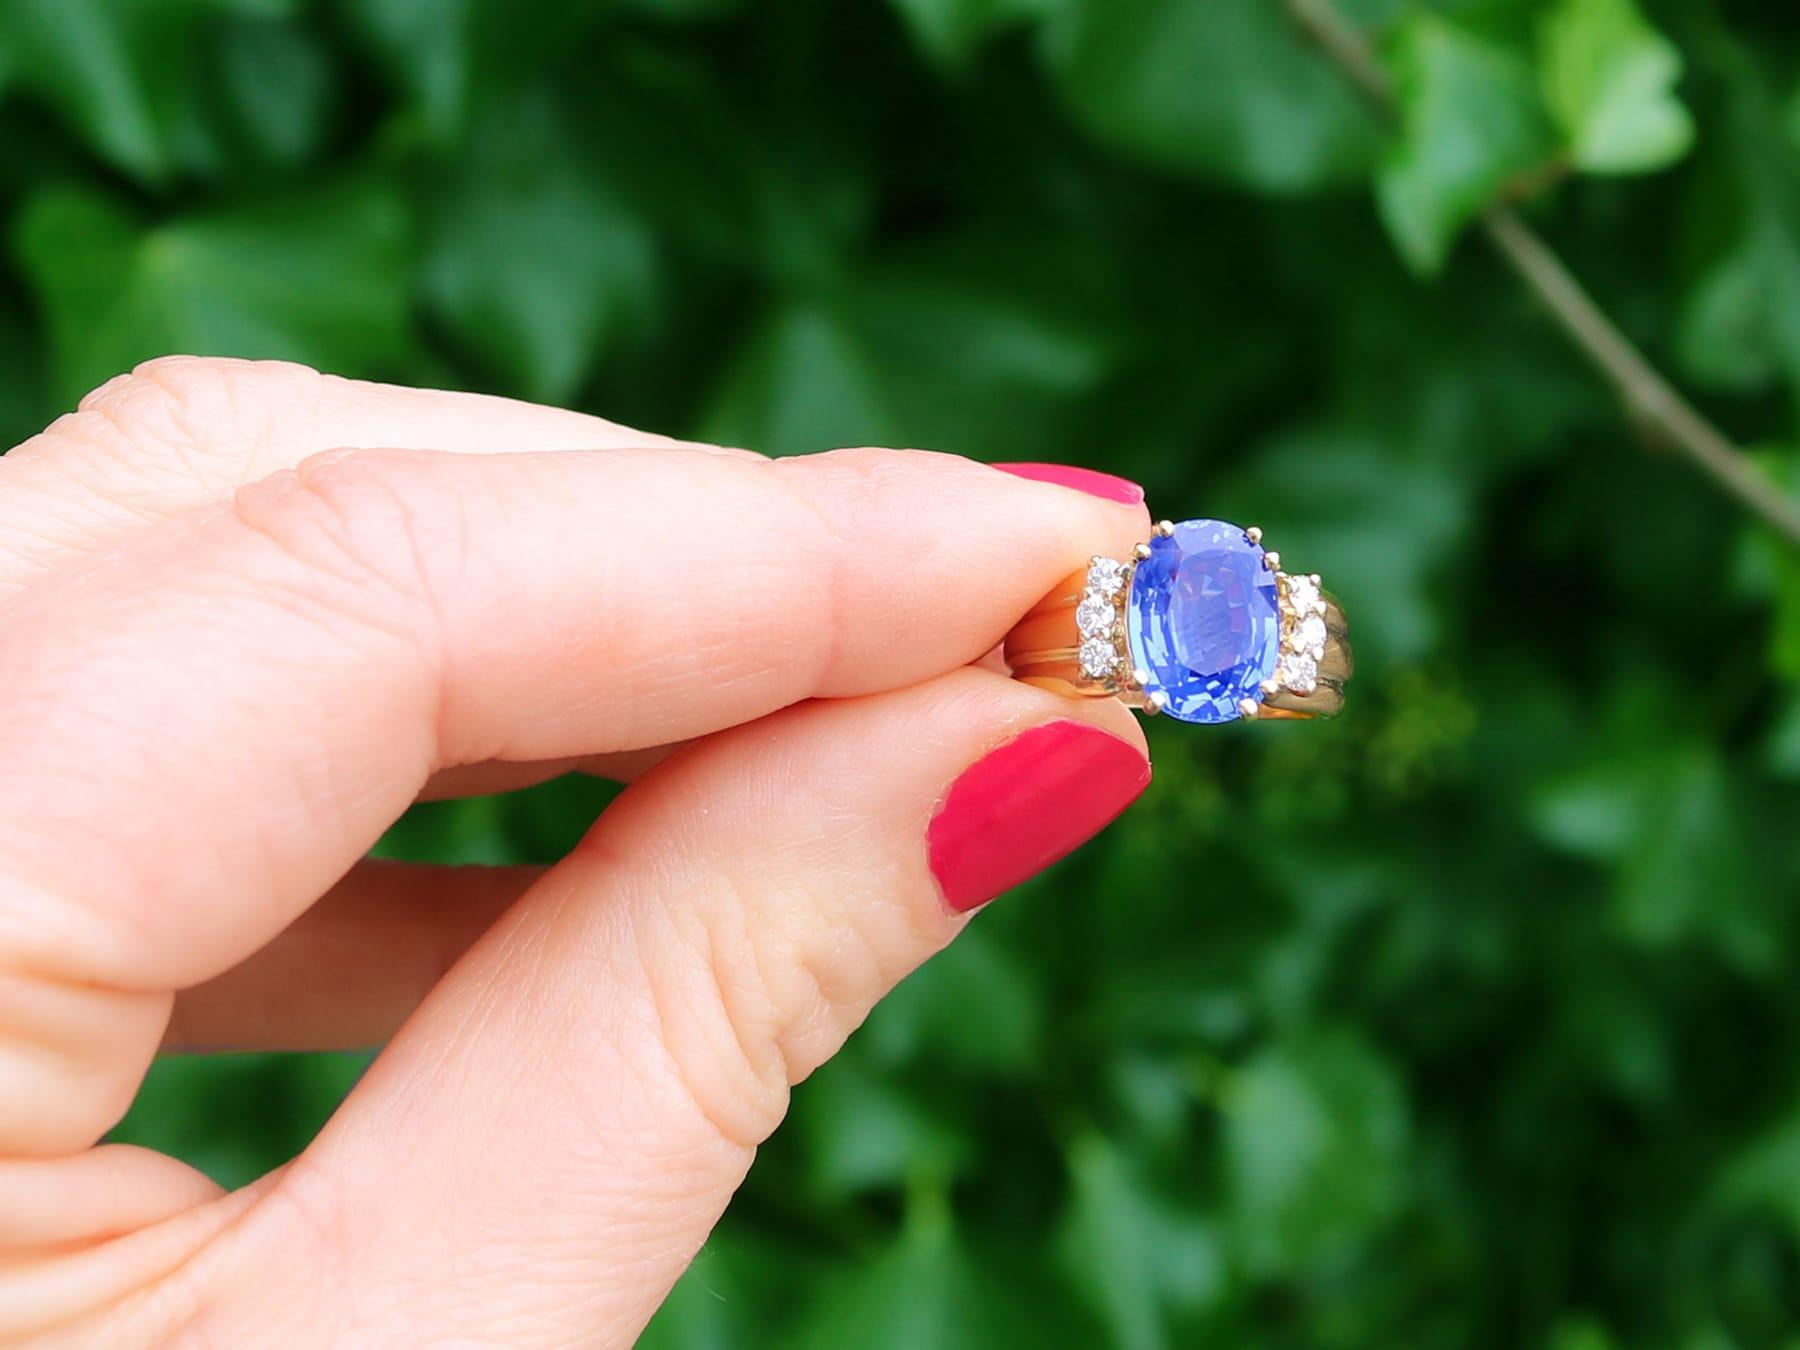 A fine and impressive vintage 4.80 carat blue sapphire and 0.15 carat diamond, yellow gold dress ring; part of our diverse gemstone jewelry collections.

This fine and impressive oval cut vintage sapphire ring has been crafted in 18k yellow